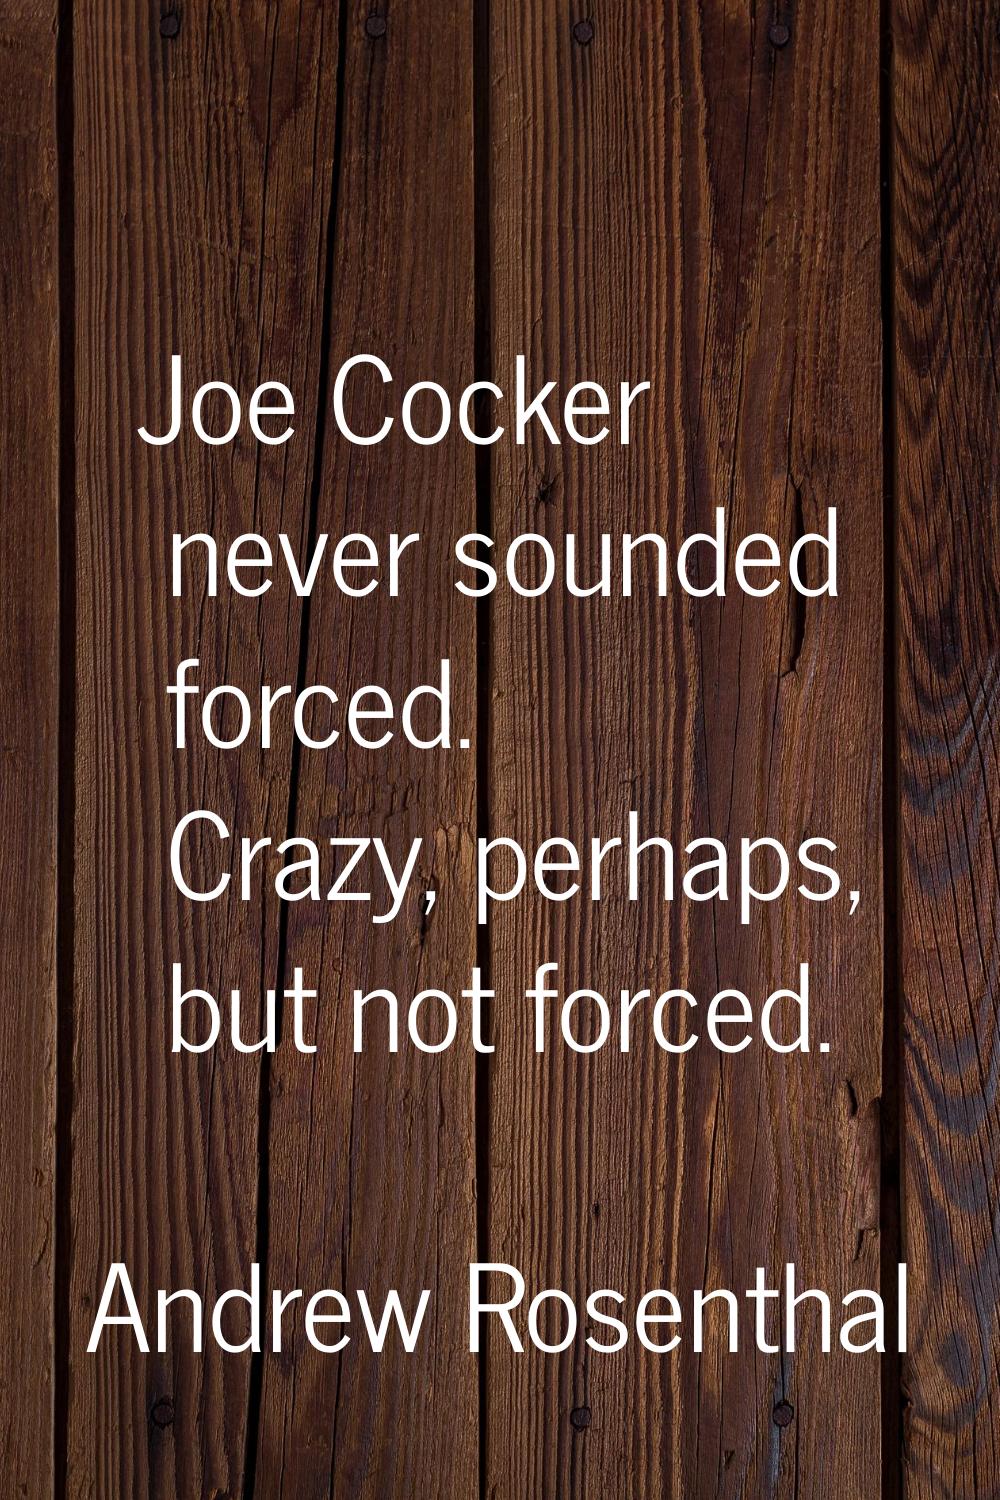 Joe Cocker never sounded forced. Crazy, perhaps, but not forced.